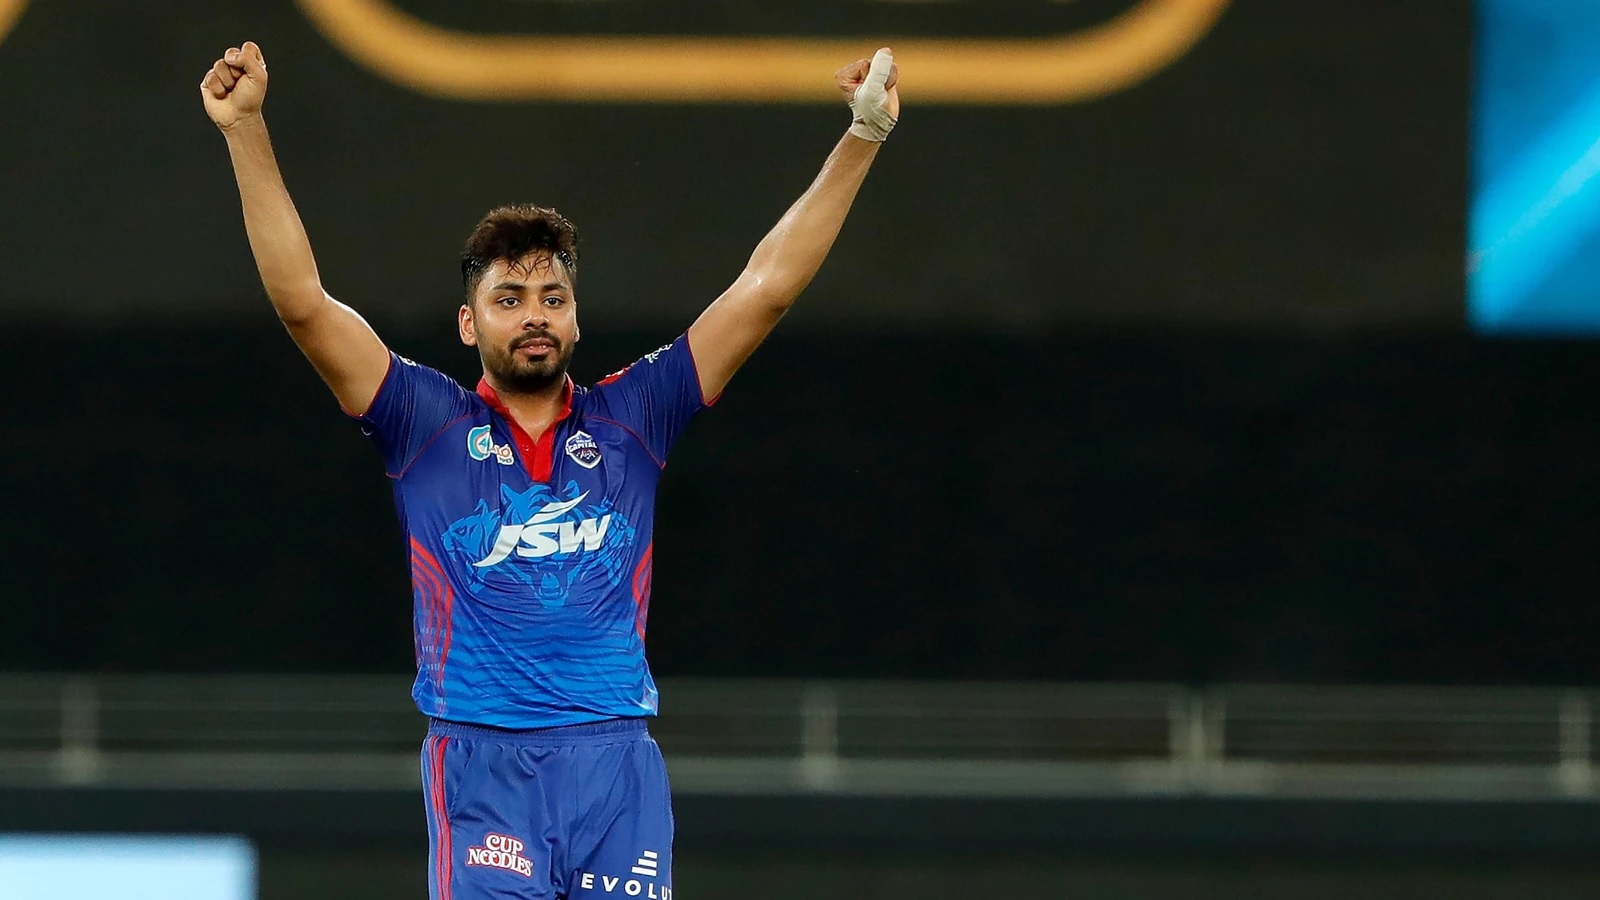 In the match against South Africa, Avesh Khan appeared in a formidable form